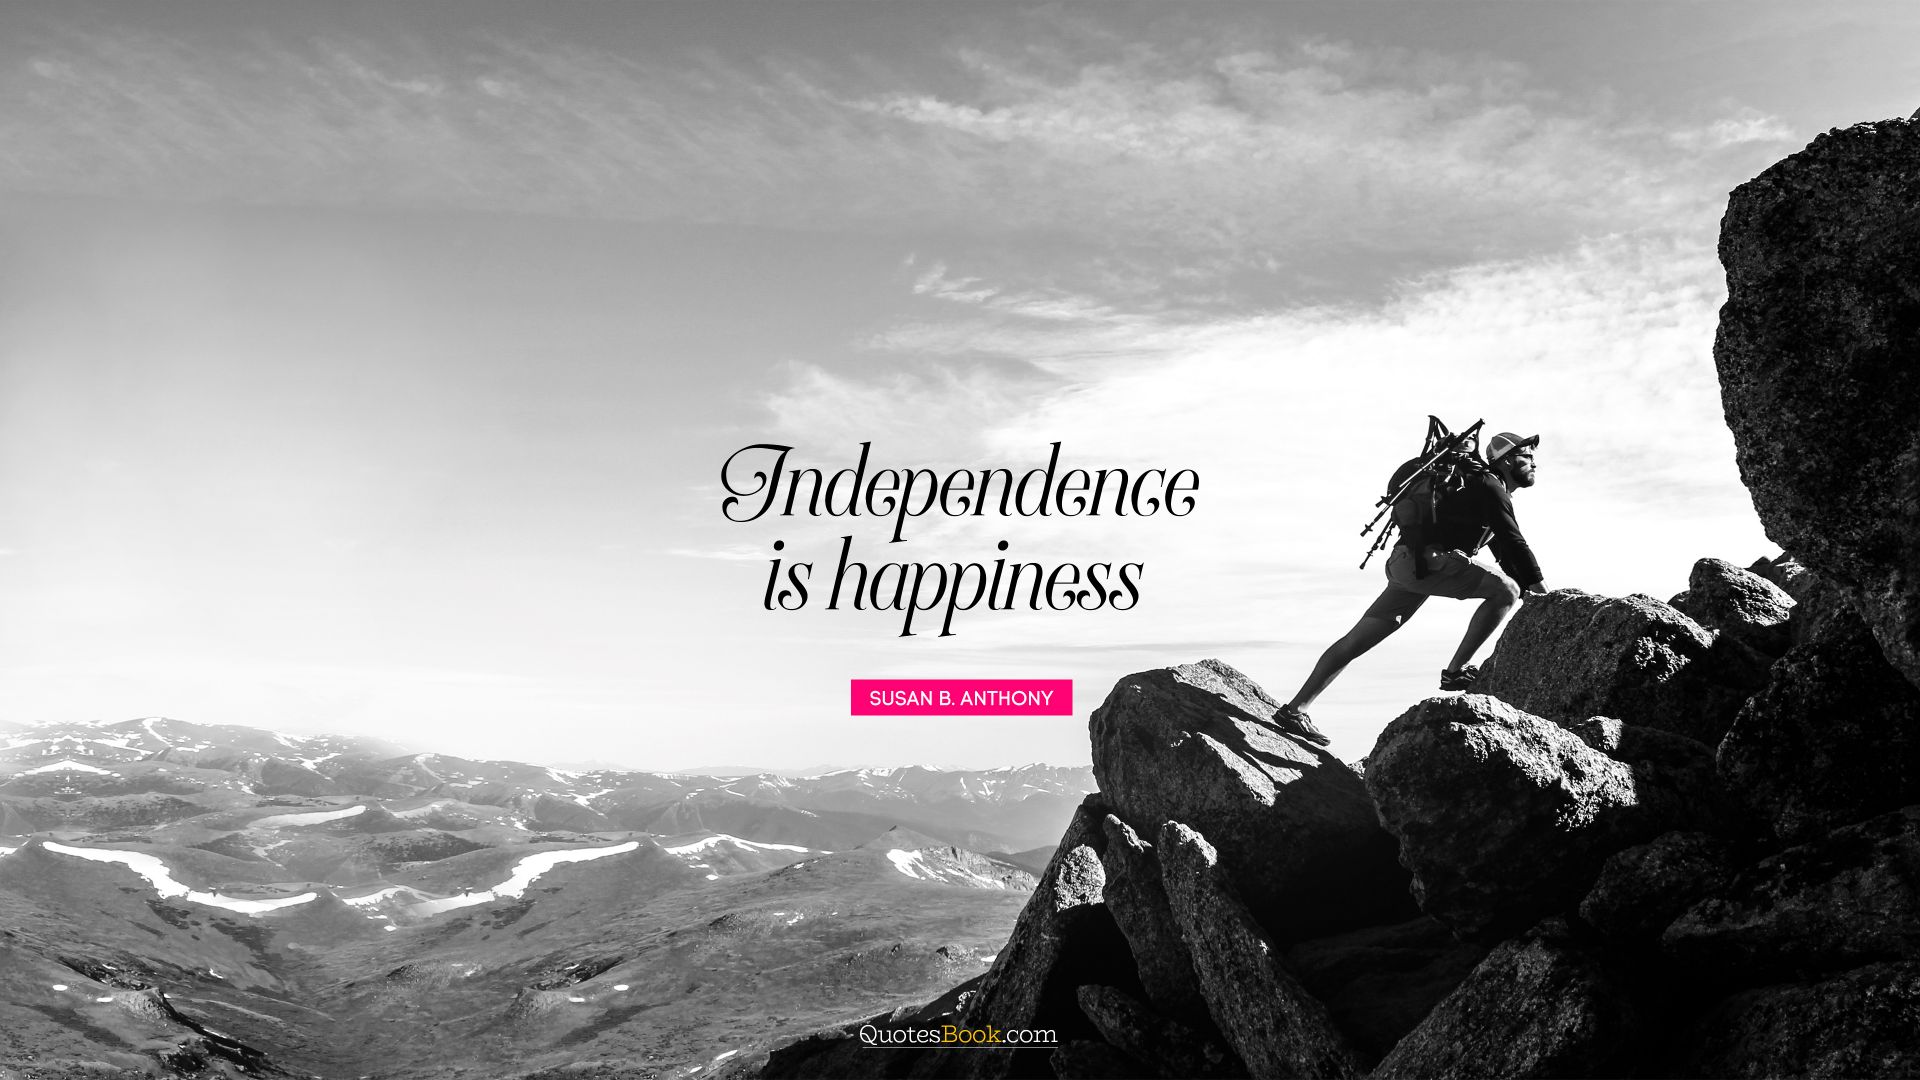 Independence is happiness. - Quote by Susan B. Anthony